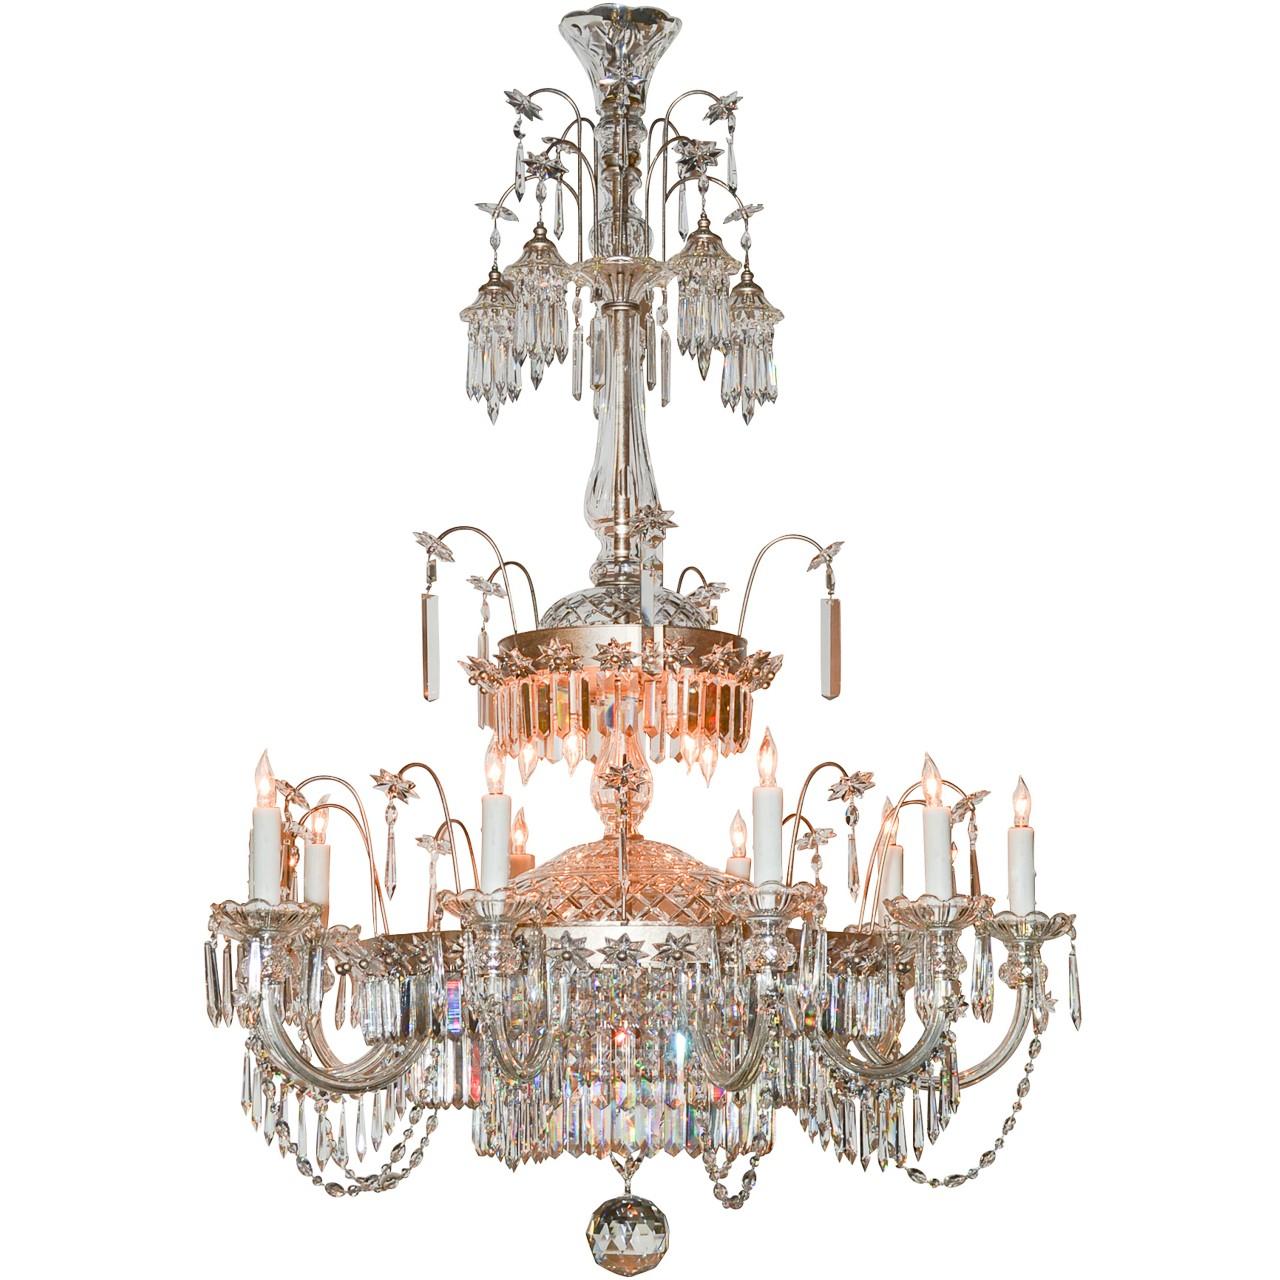 Midcentury French Cut Crystal Fifteen-Light Chandelier